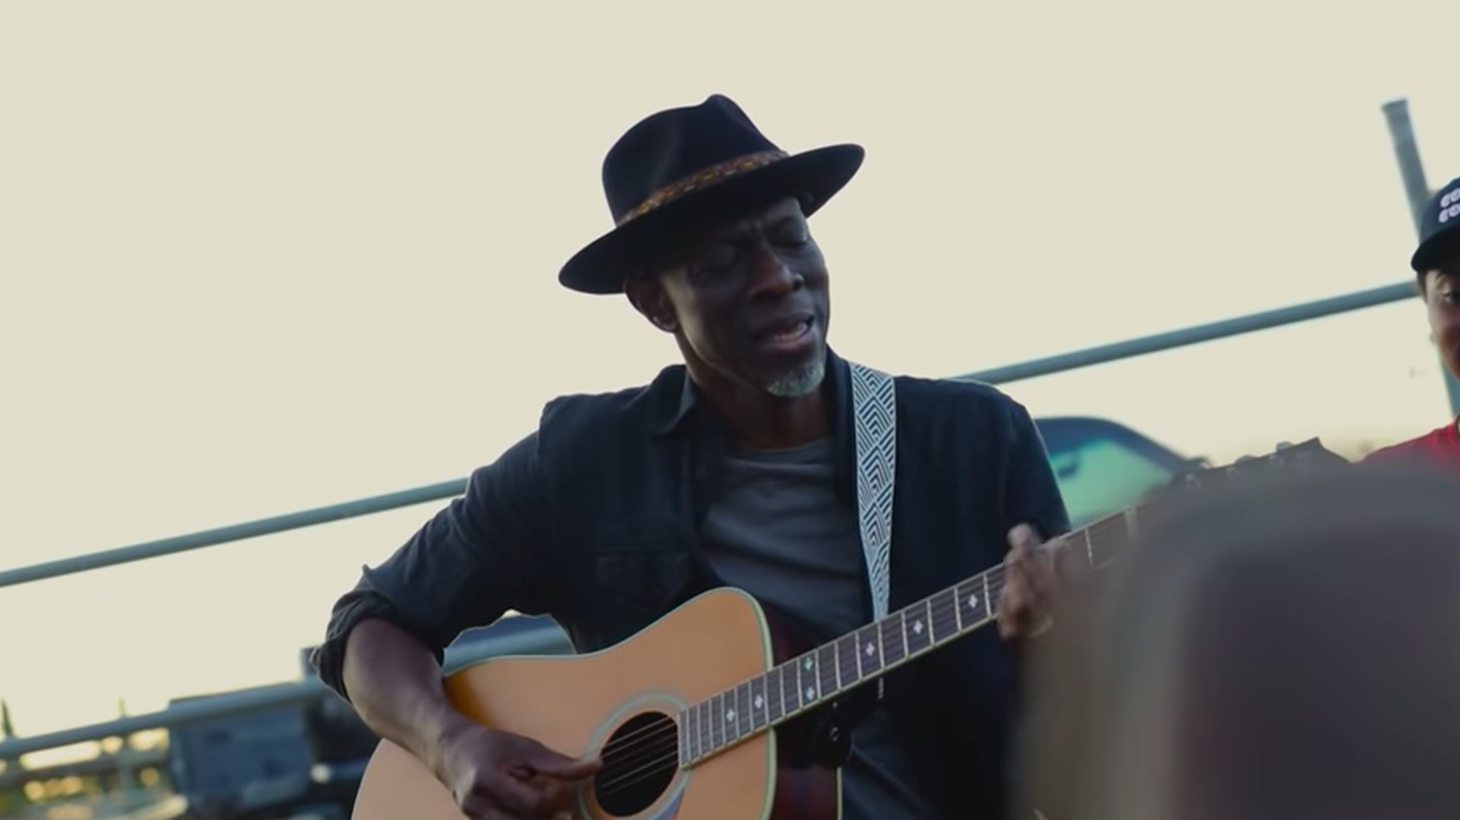 Earlier this year, Keb’ Mo’ released this new album called “Good to Be.”